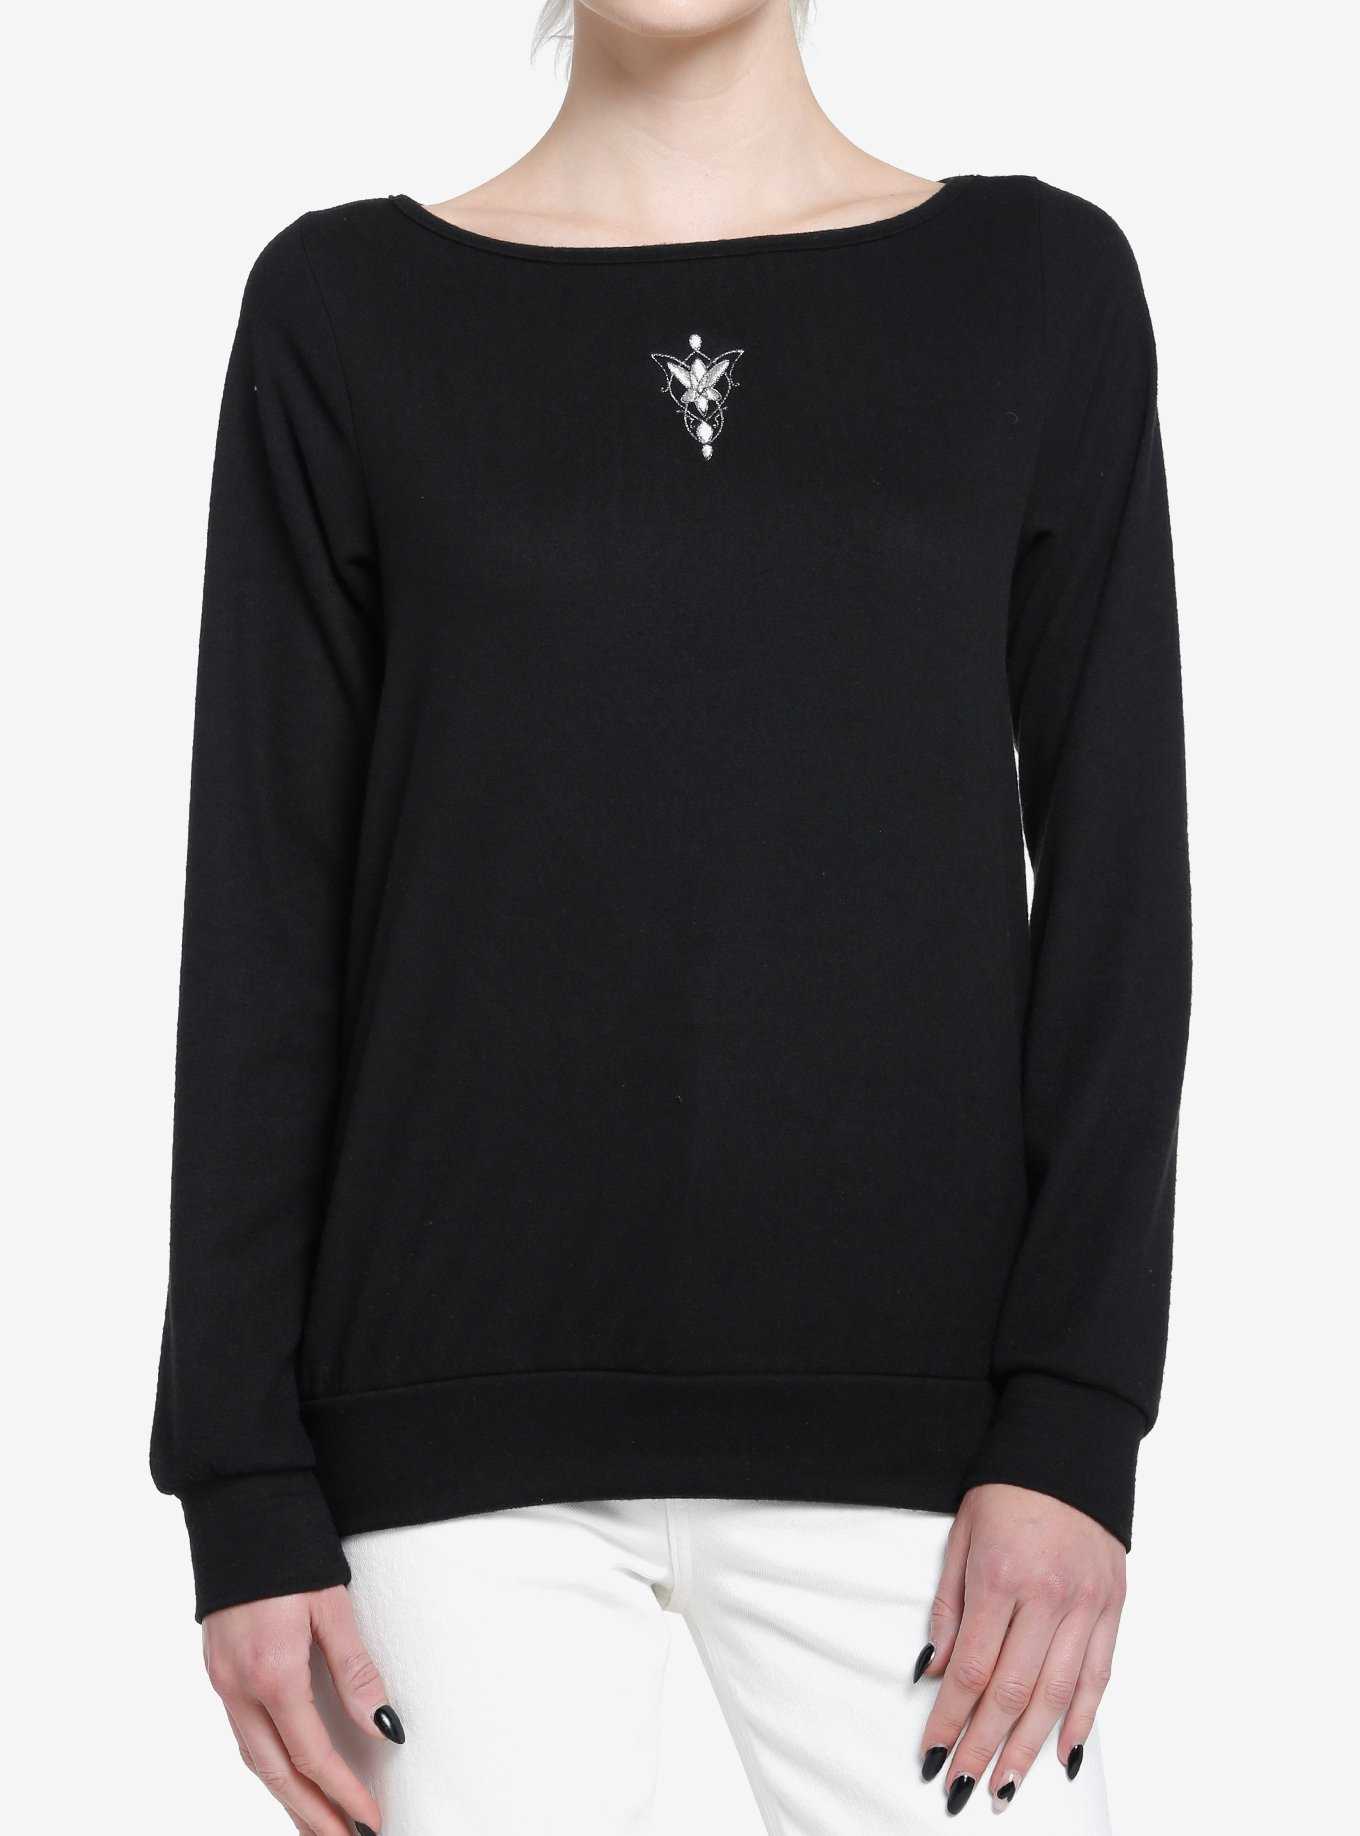 Her Universe The Lord Of The Rings Arwen Evenstar Sweater Her Universe Exclusive, , hi-res